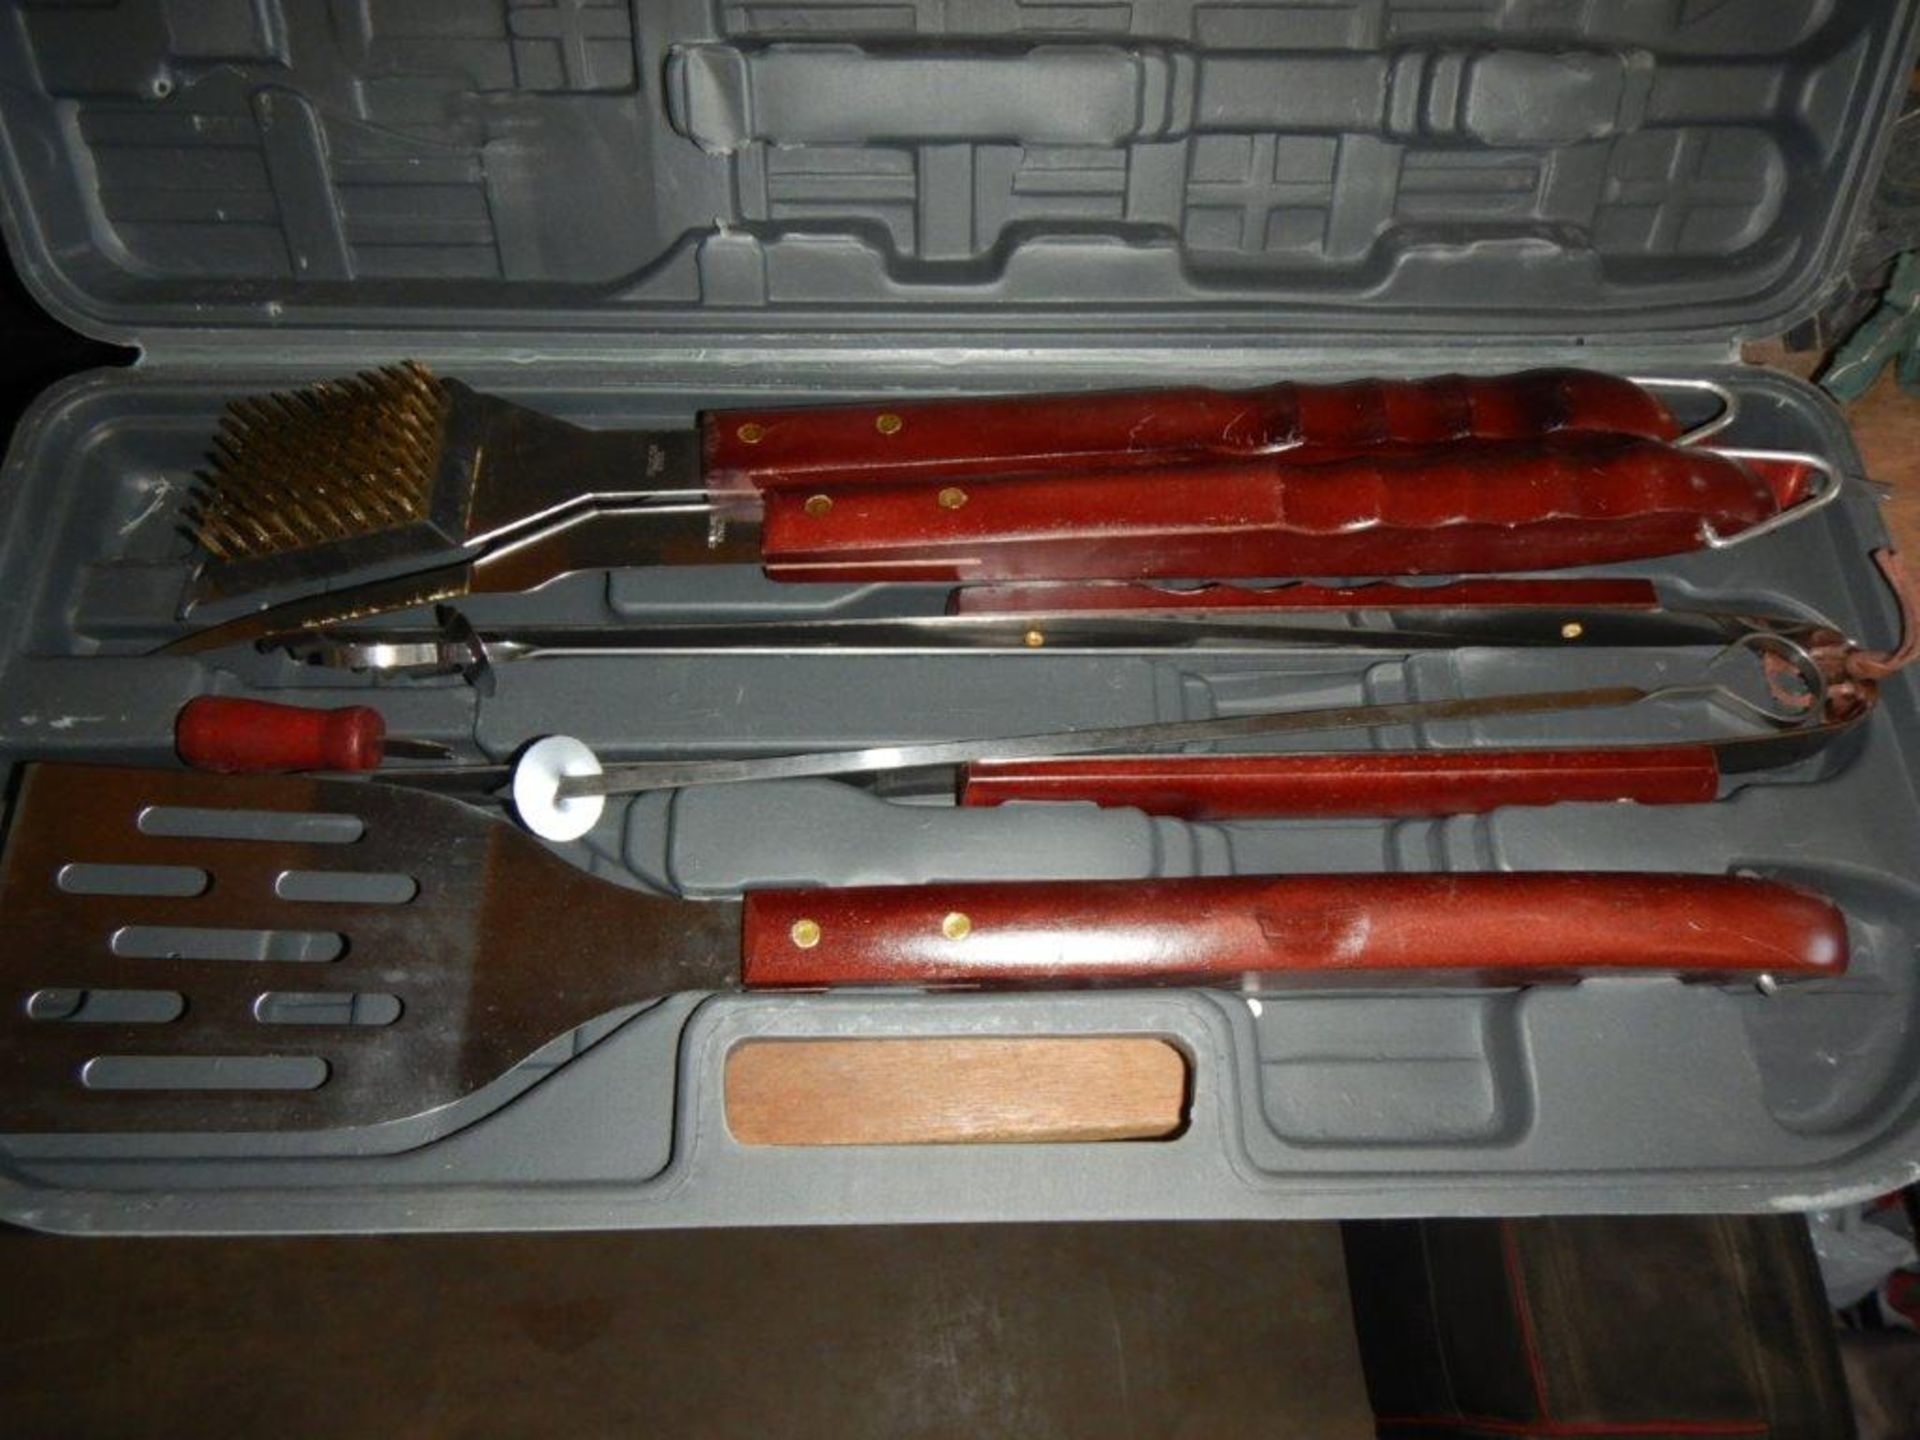 BBQ GRILLING UTENSILS KIT W/CAMP KITCHEN SUPPLIES - Image 2 of 4